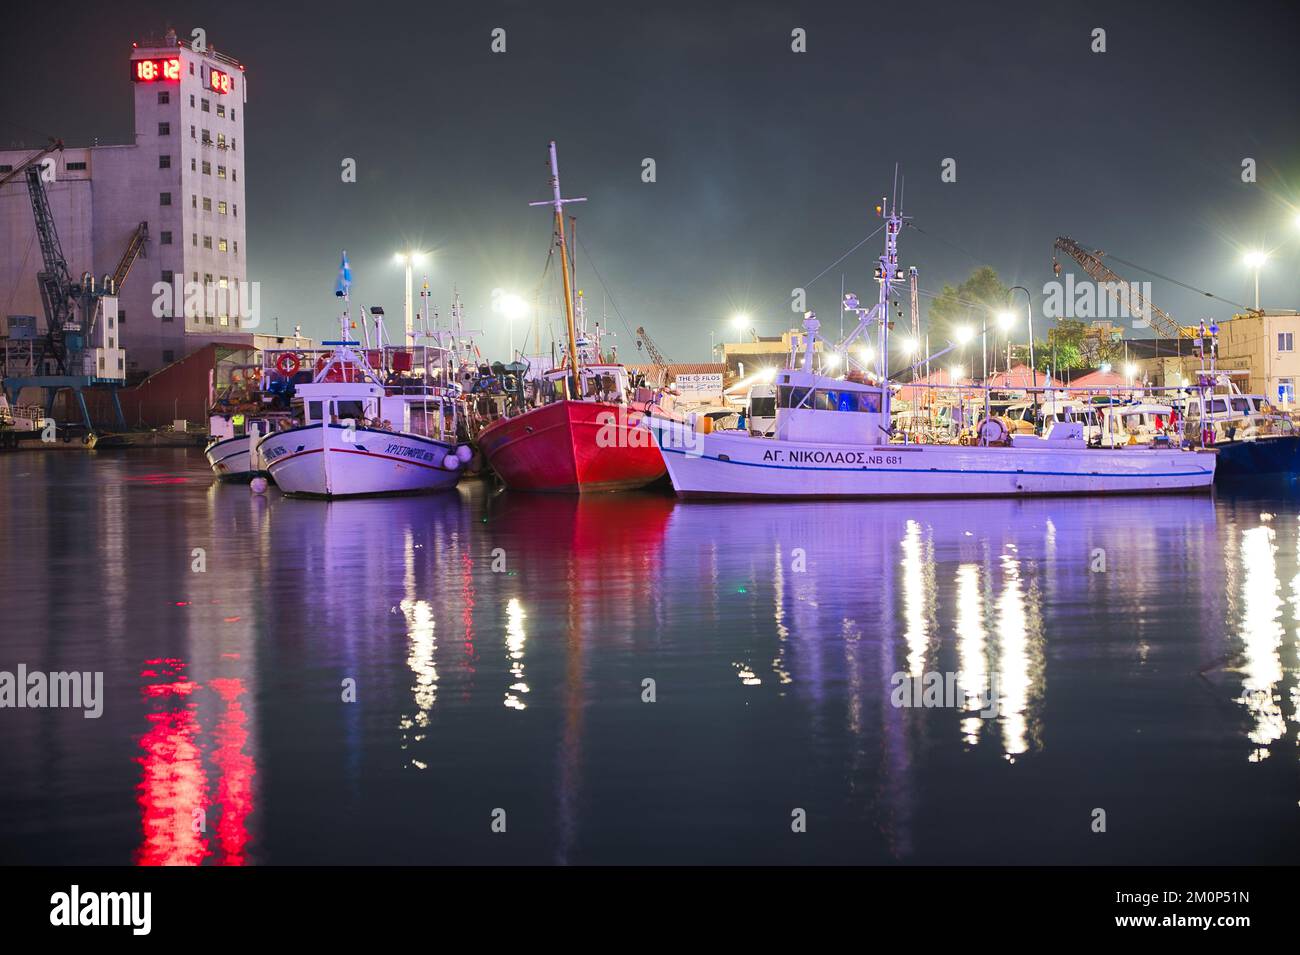 Traditional wooden fishing boats and boats moored in an old port, night photography, Volos Greece Stock Photo